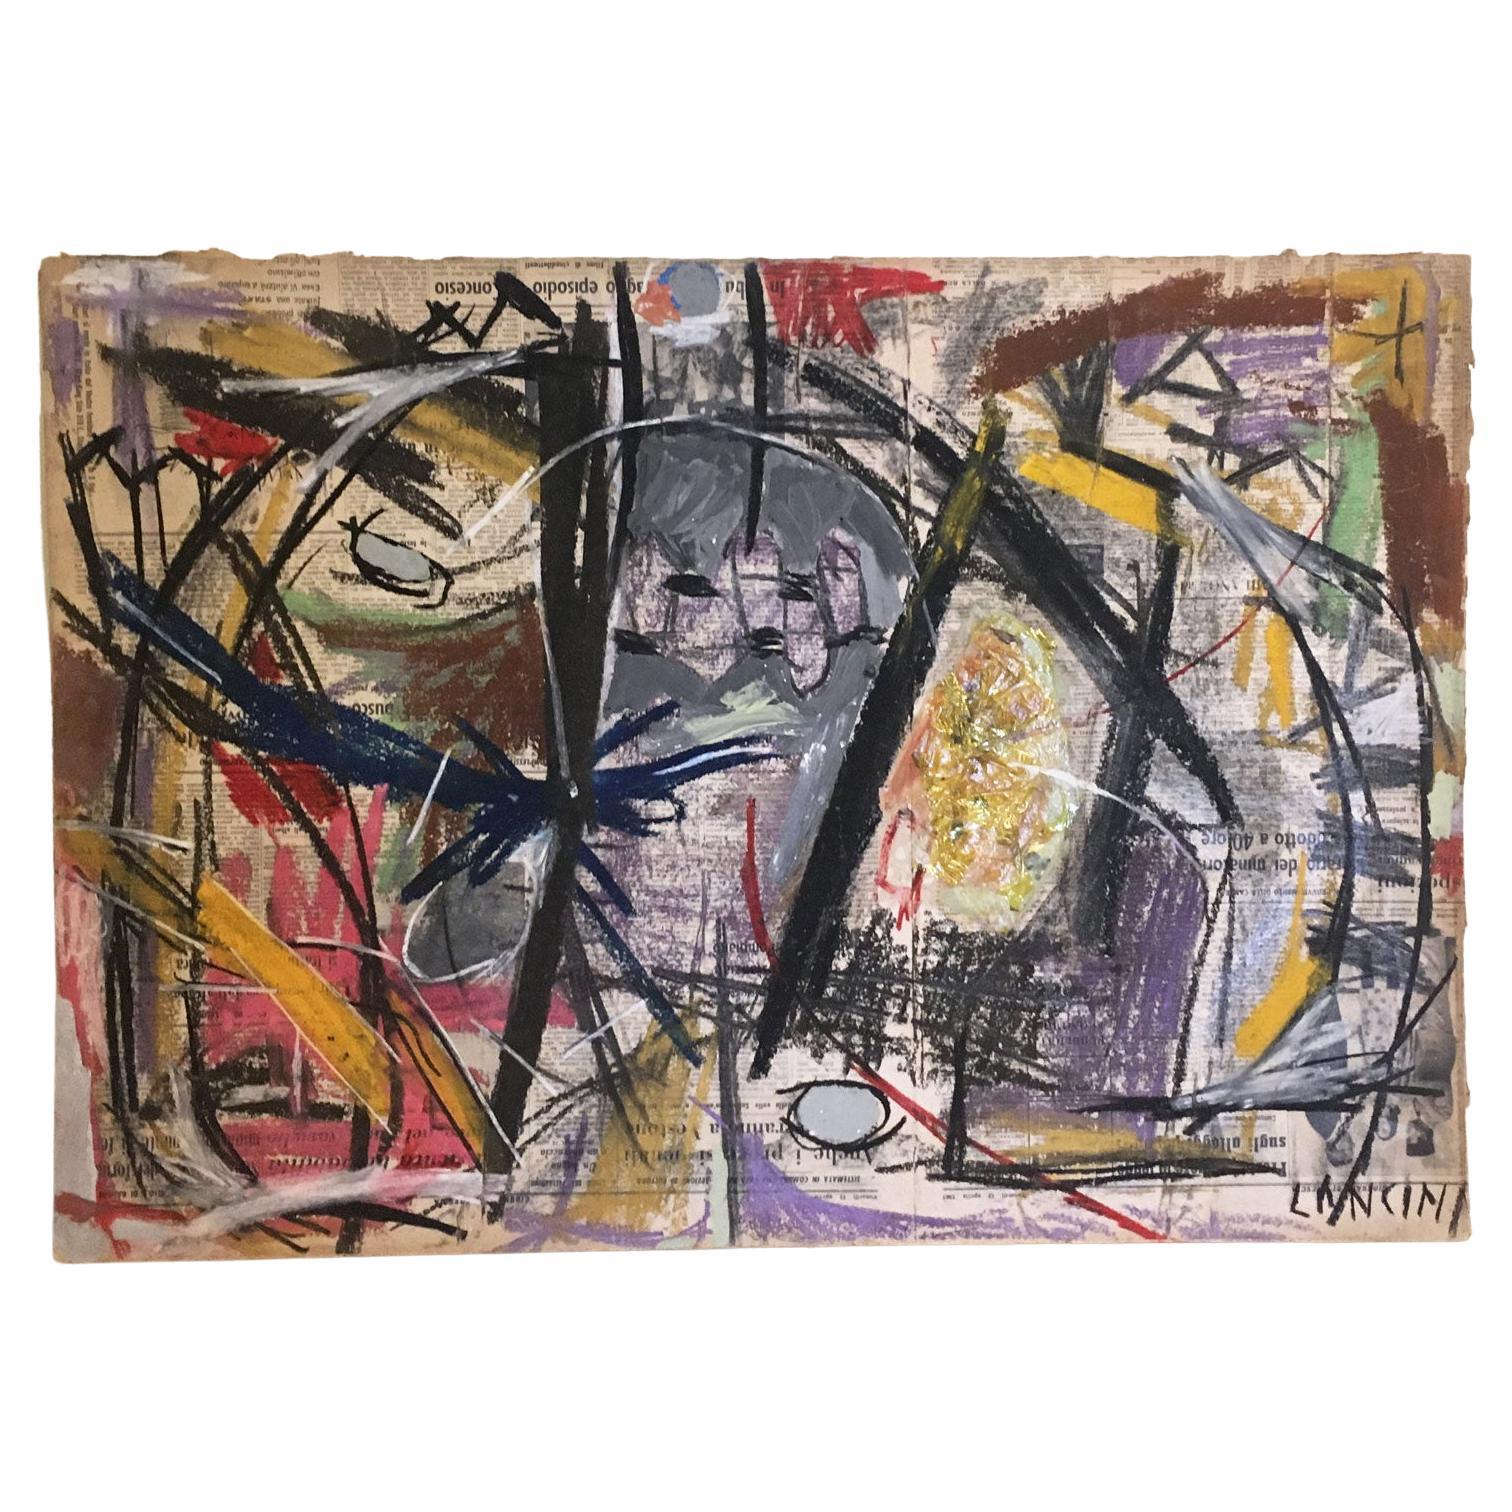 1962 Italy Abstract Pastel Painting and Paper Collage by Ermete Lancini